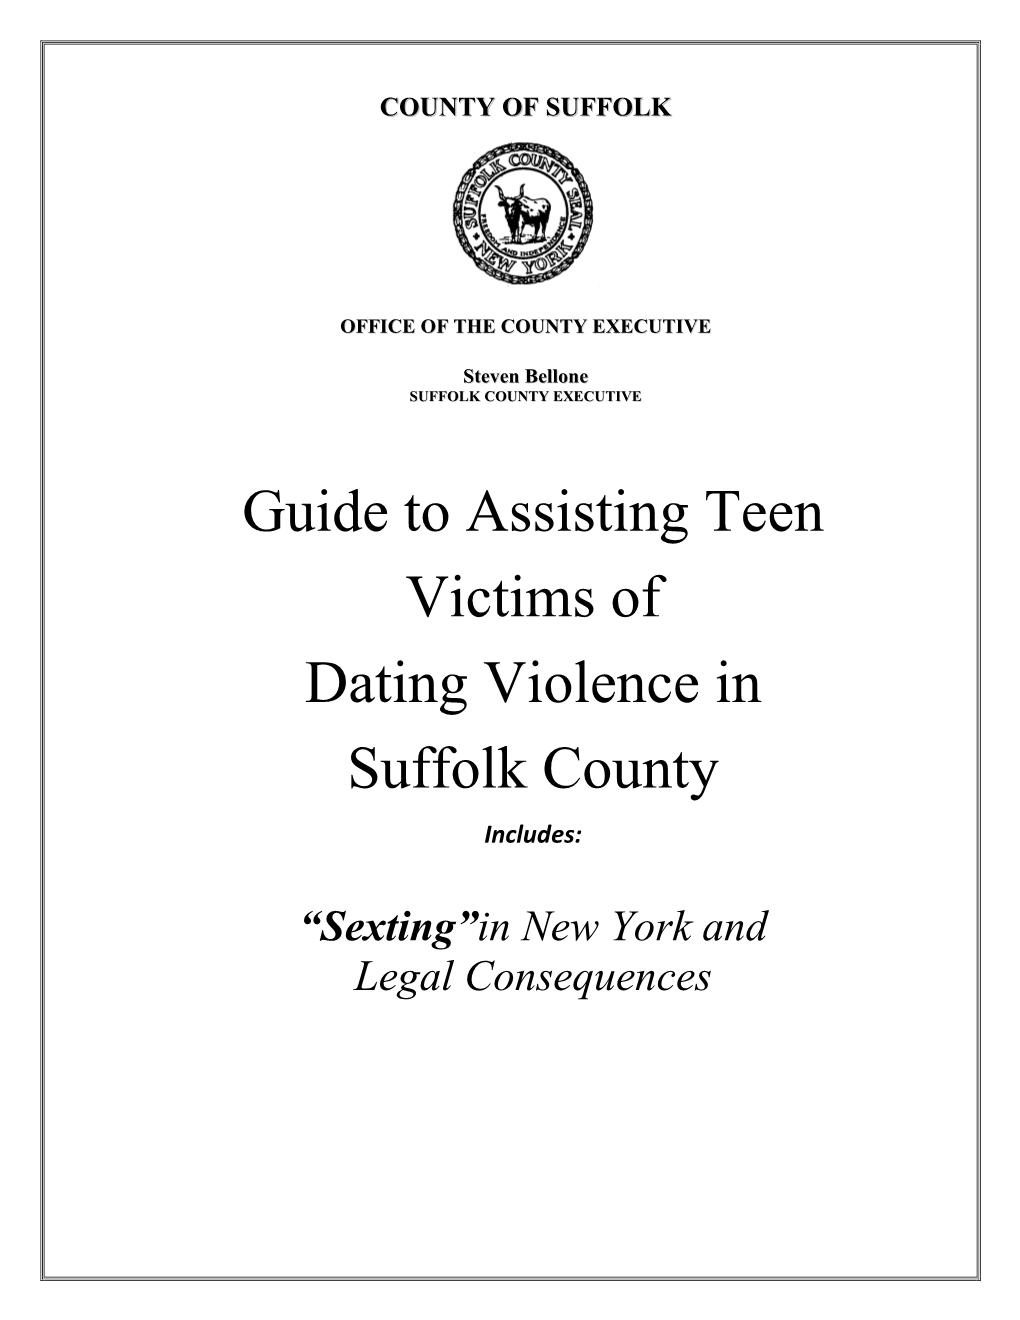 Guide to Assisting Teen Victims of Dating Violence in Suffolk County Includes